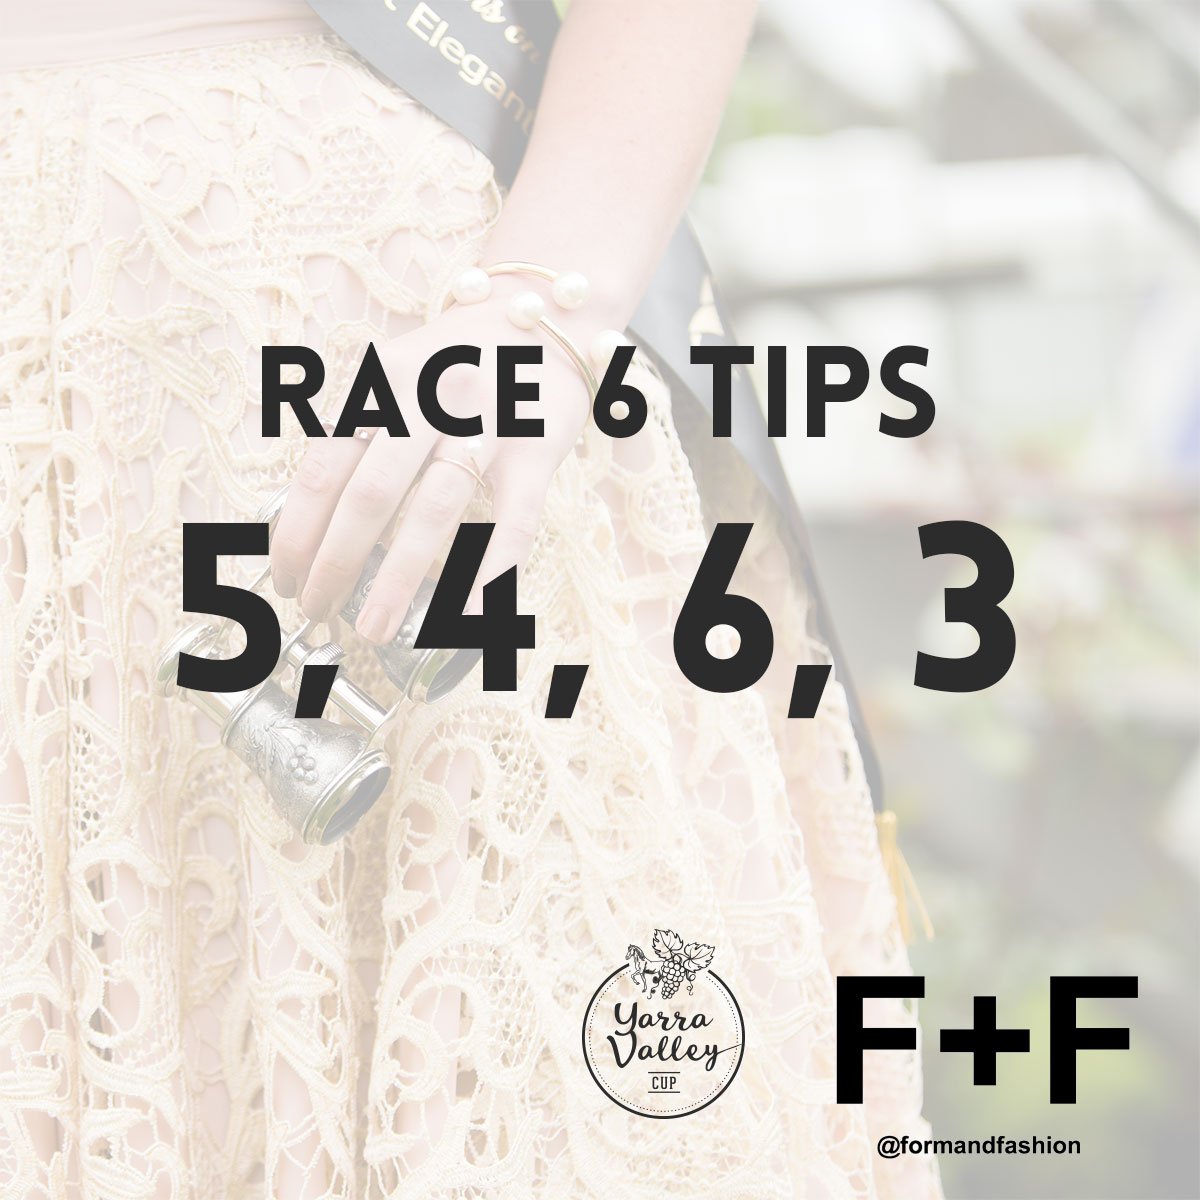 #YVCup Tips for Race 6: 5, 4, 6, 3